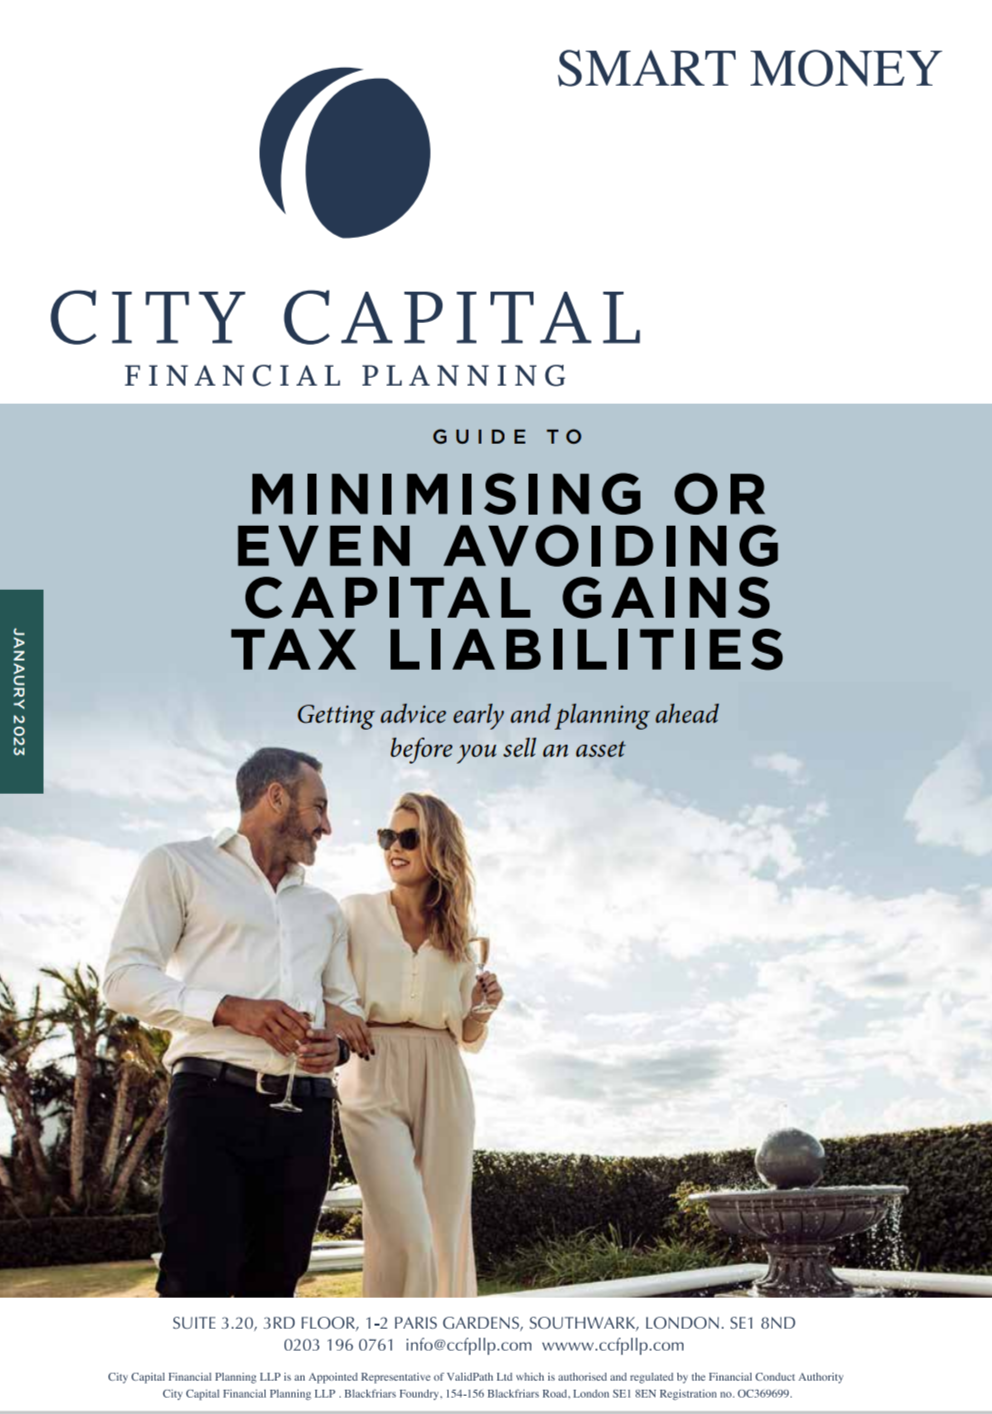 Guide to Minimising or even avoiding Capital Gains Tax Liabillites